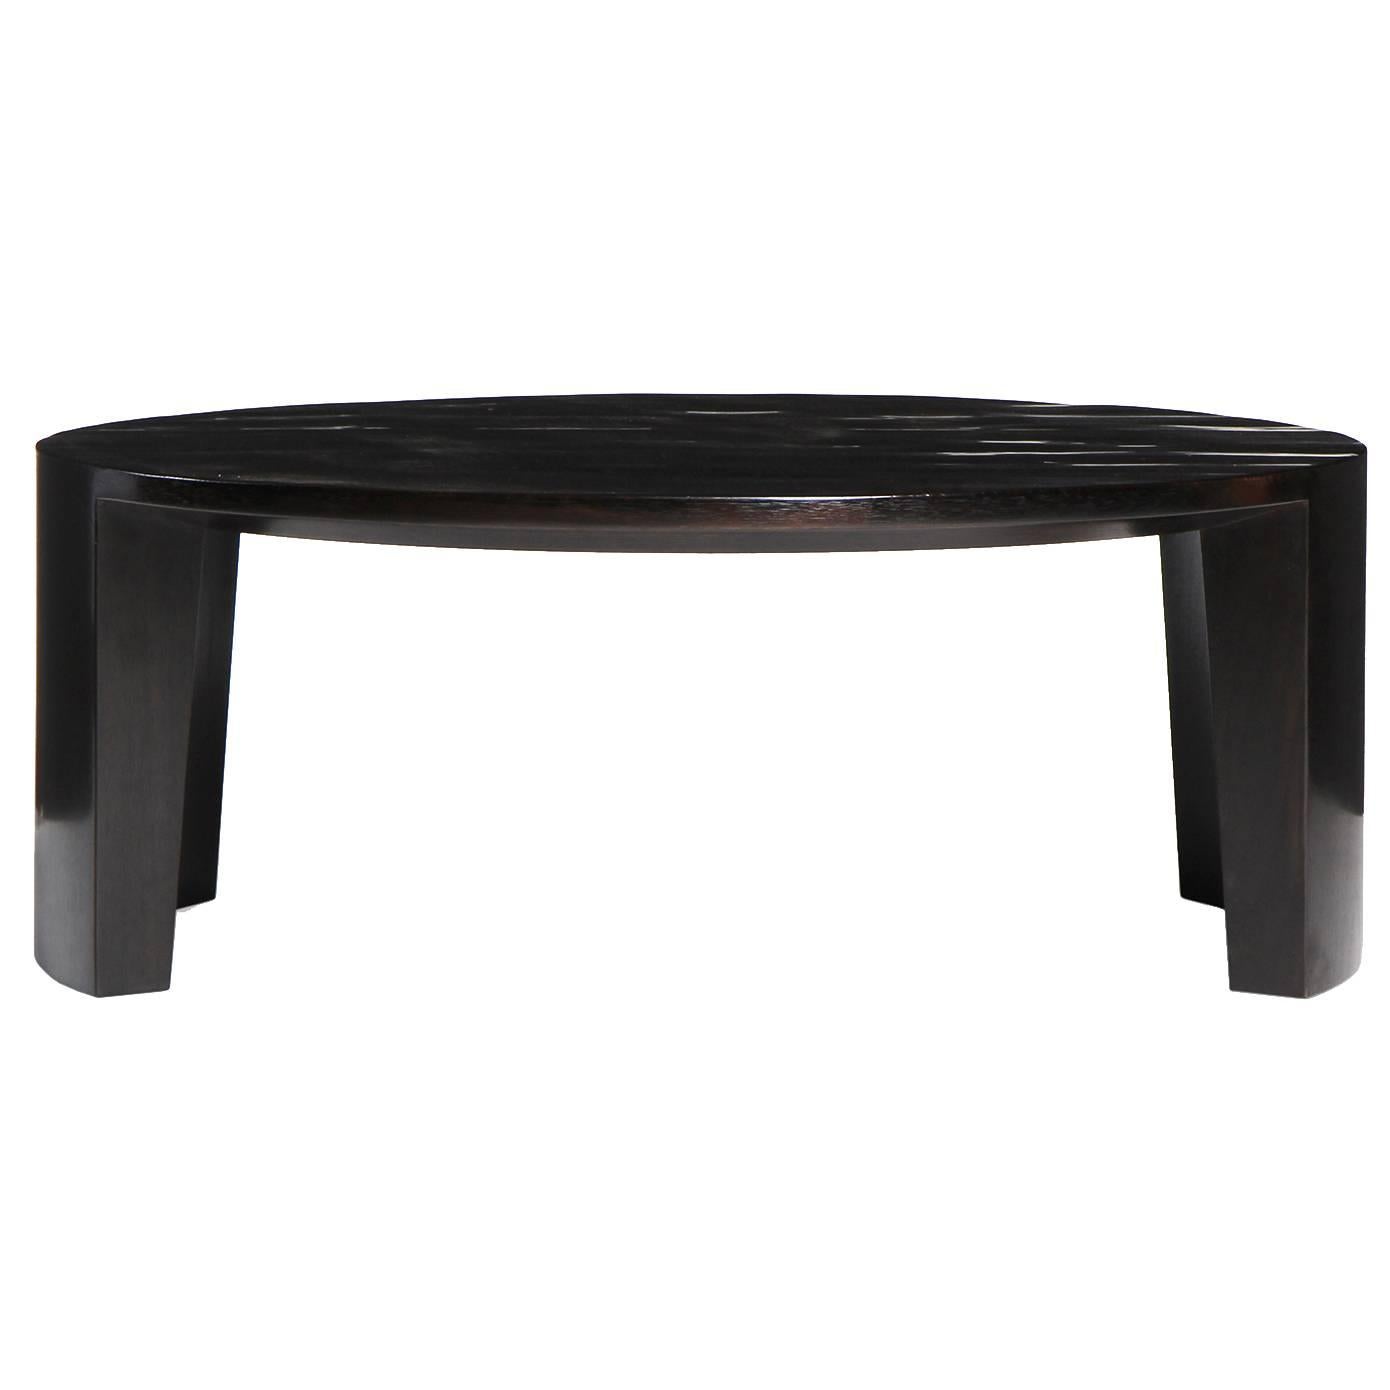 Split Bamboo Low Table by WYETH